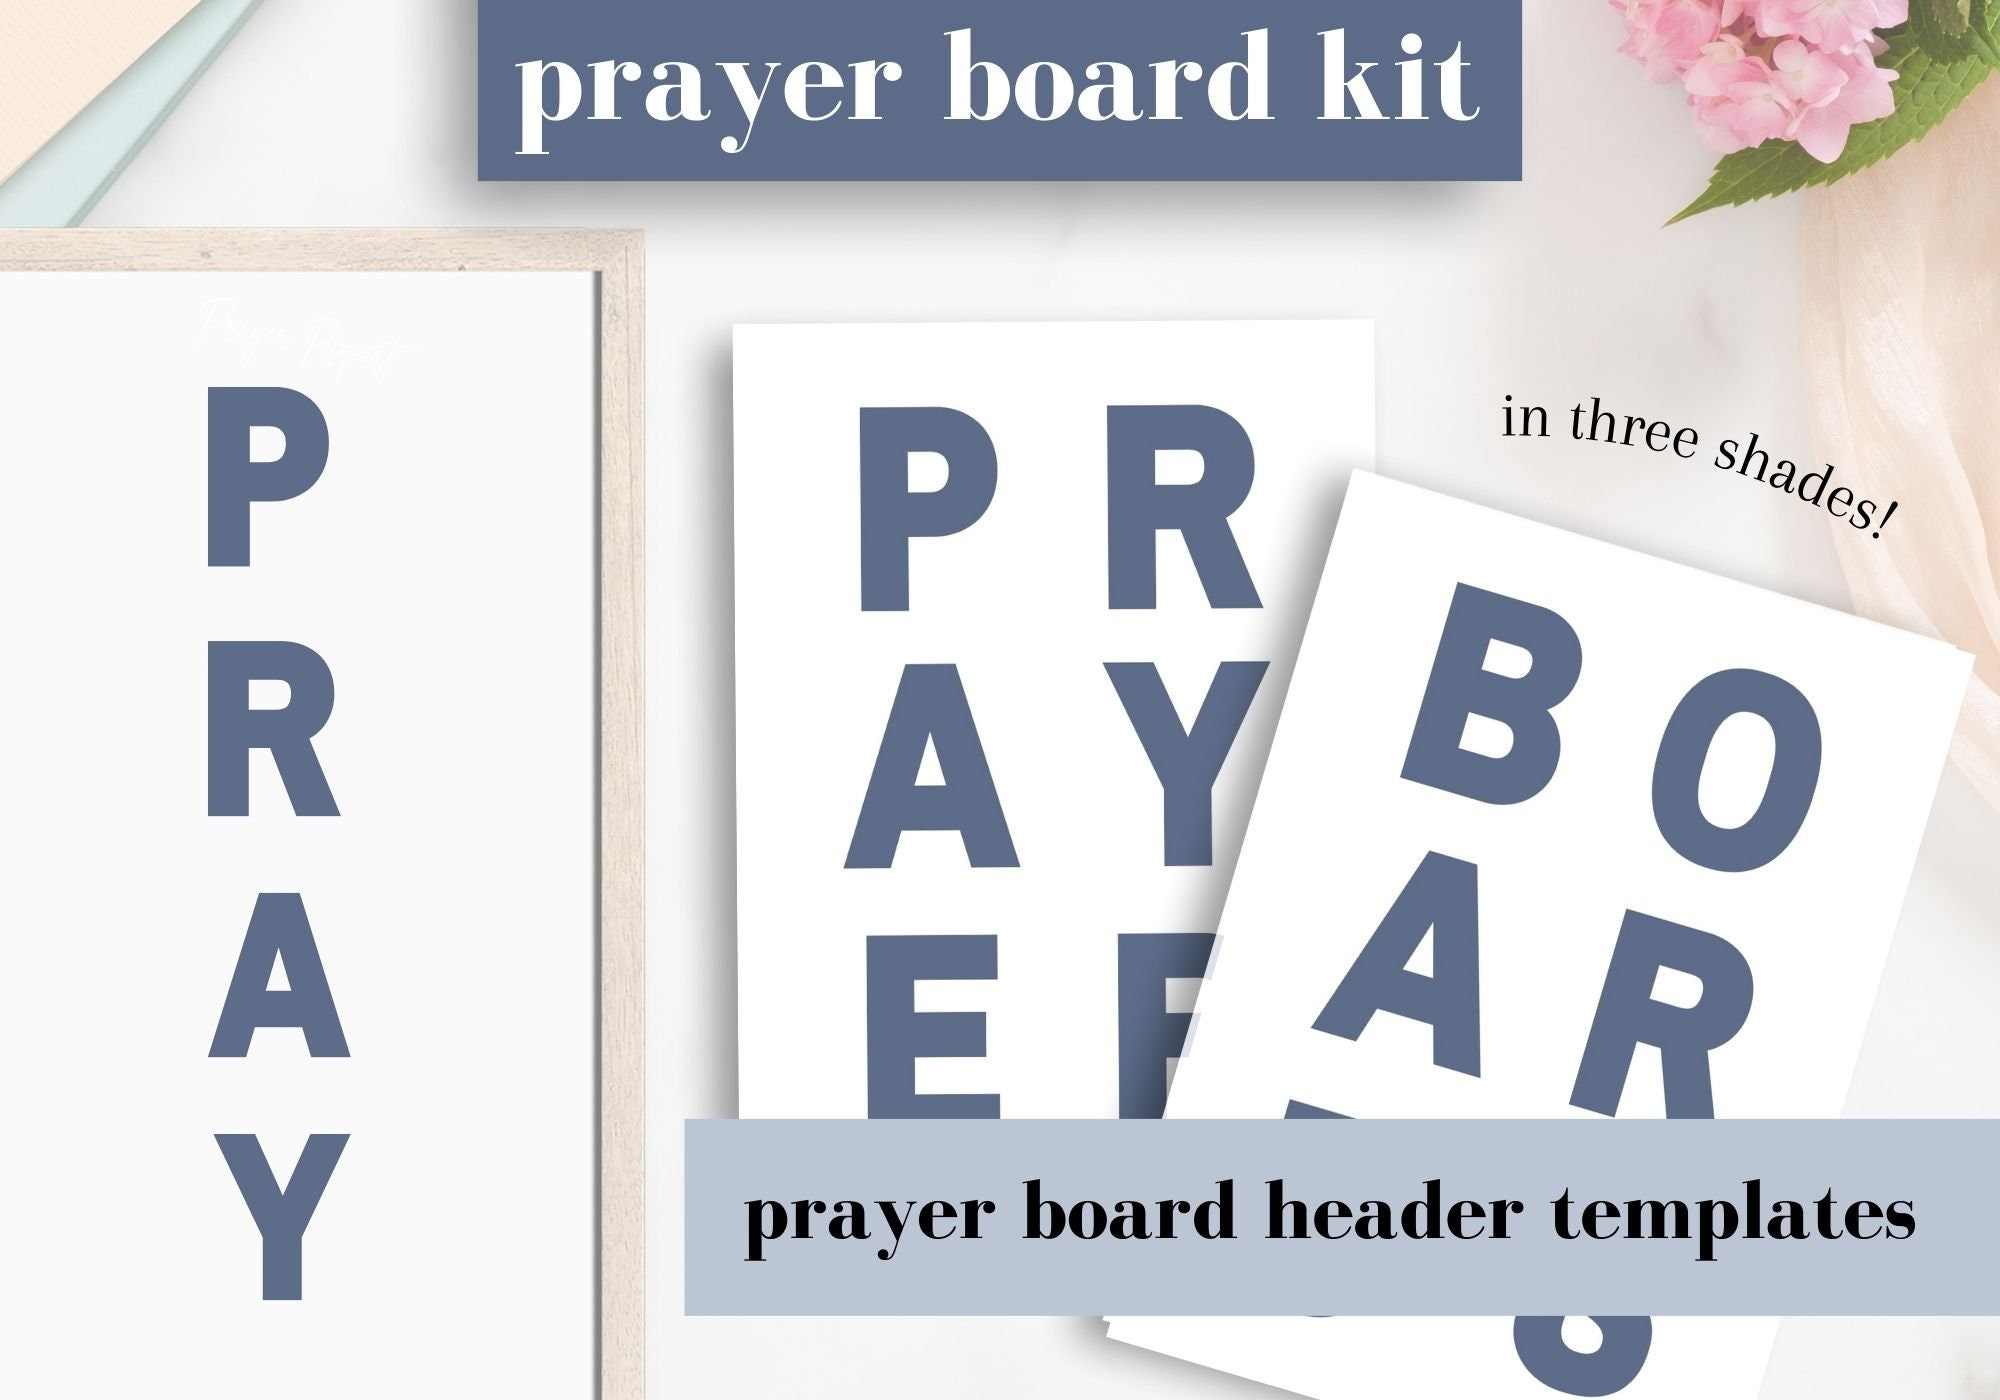 Printable Prayer Board Kit - Sweet Edition - Christian Church Prayer Group  Bible Verse Cards Craft Activity Instant Download